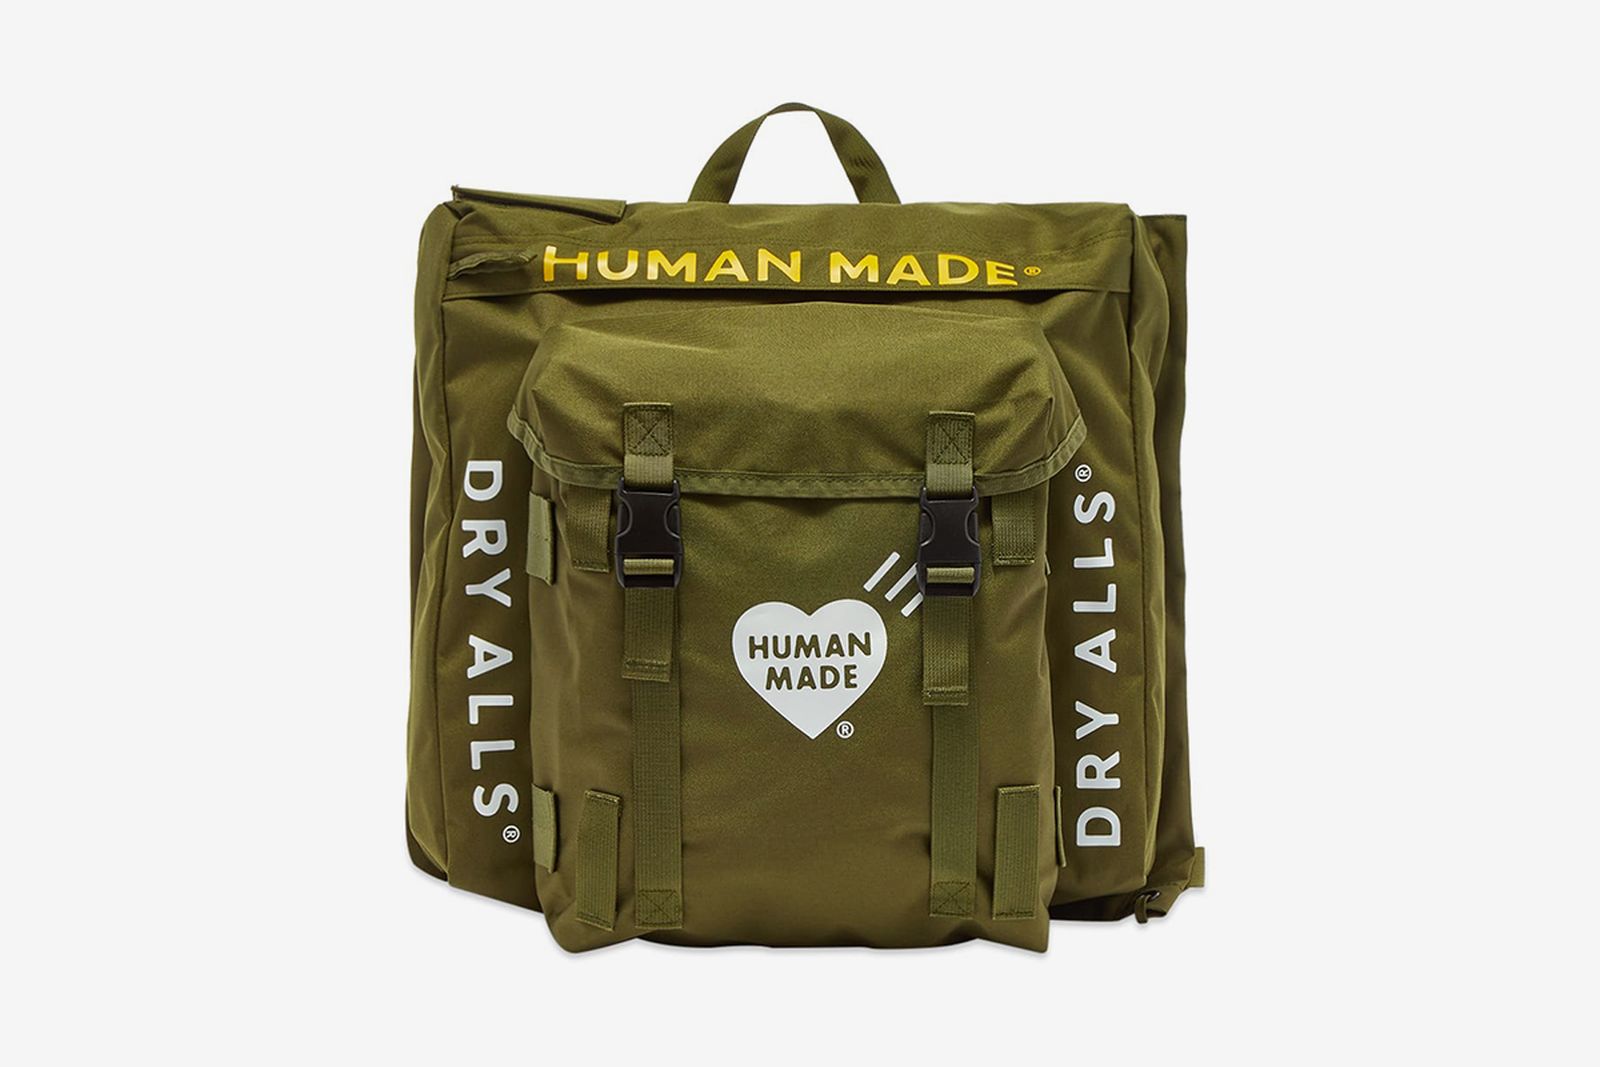 human-made-military-rucksack---olive-drab---_hm19gd035-old_1